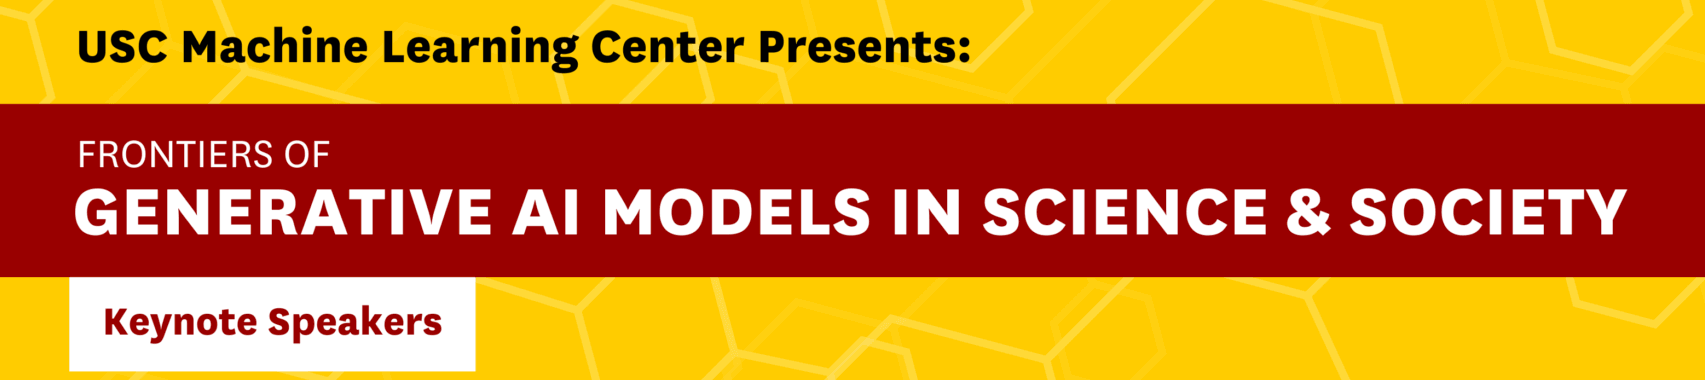 Featured image for “[UG/MS/PhD] MLC Symposium: Frontiers of Generative AI Models in Science & Society”